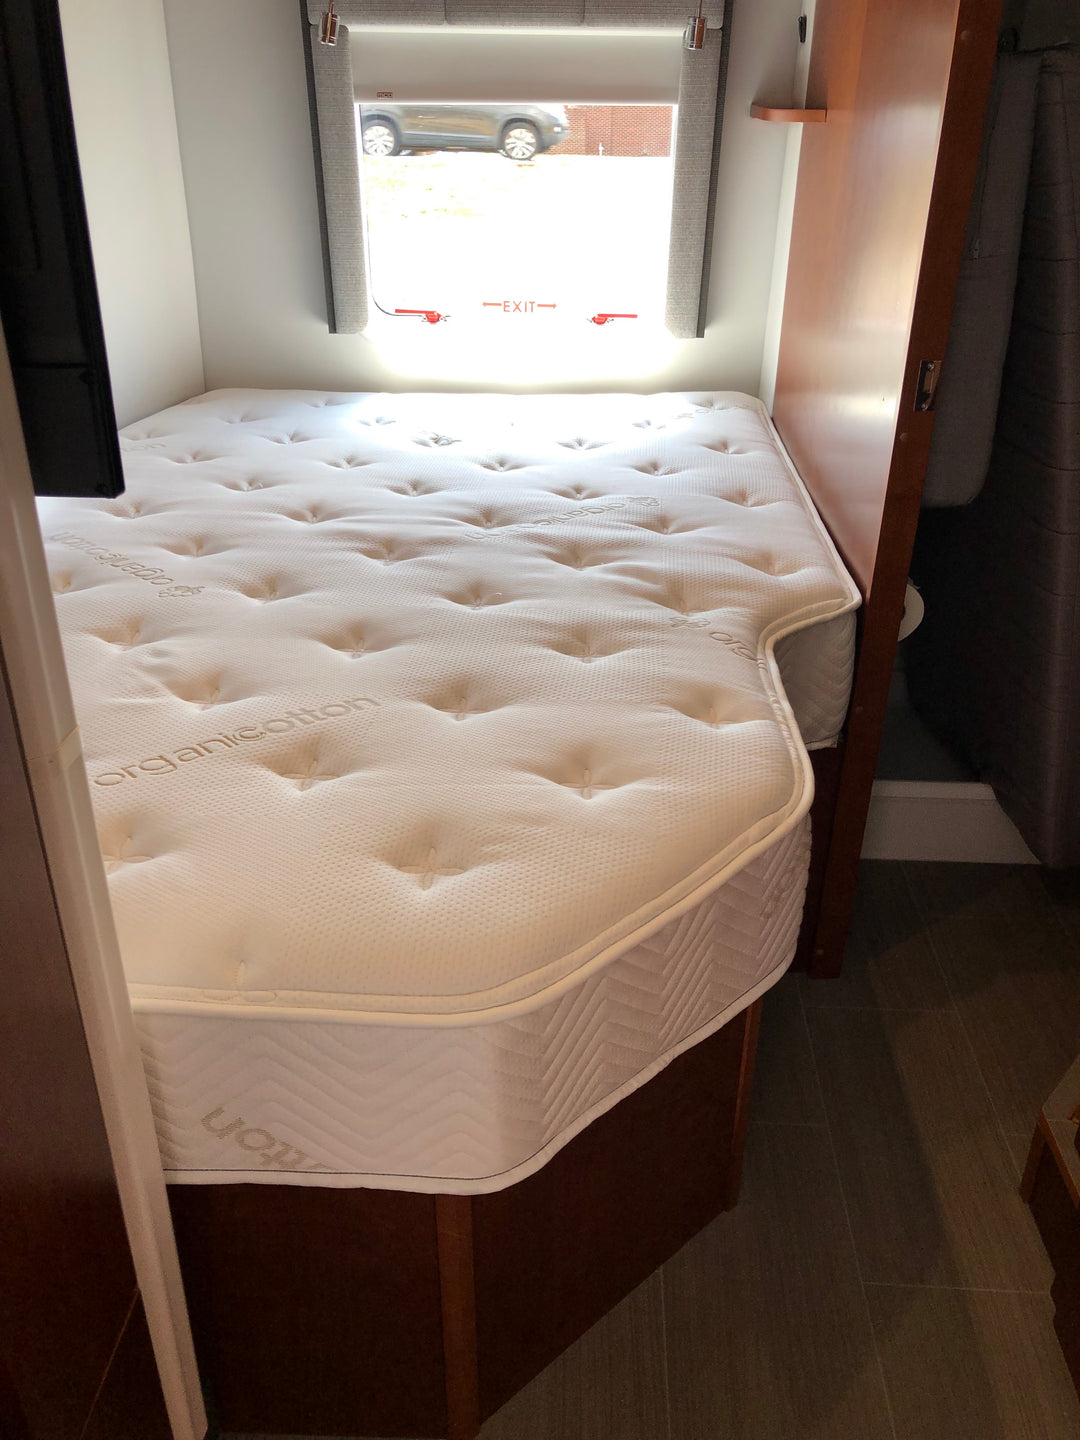 this is a custom size mattress we made for an RV Camper with custom cut corners.